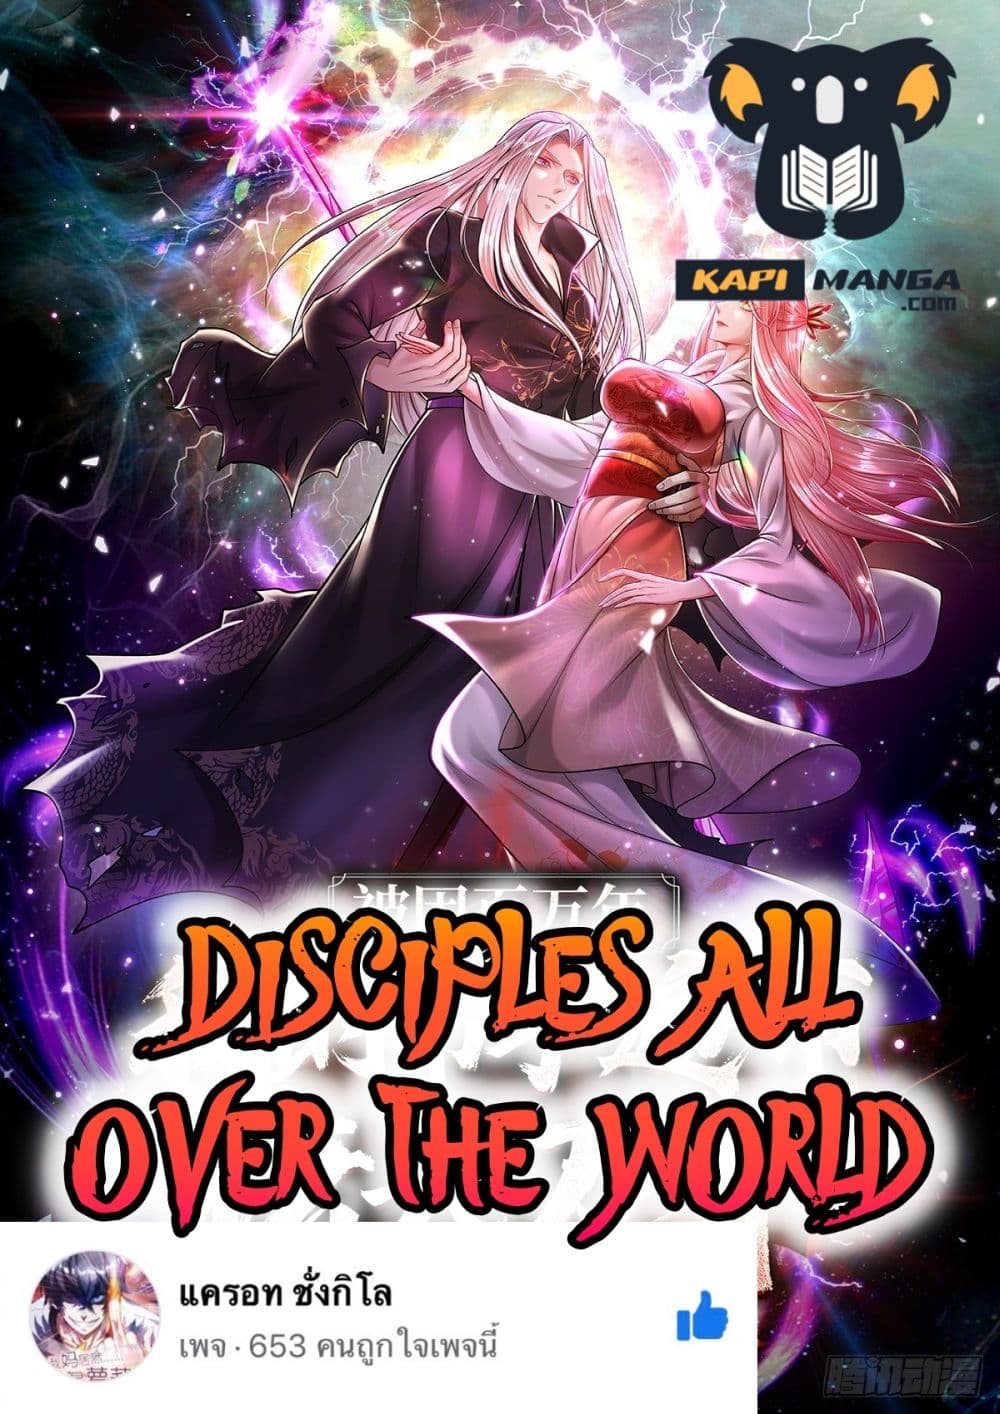 Disciples All Over the World à¸à¸­à¸à¸à¸µà¹ 65 (1)